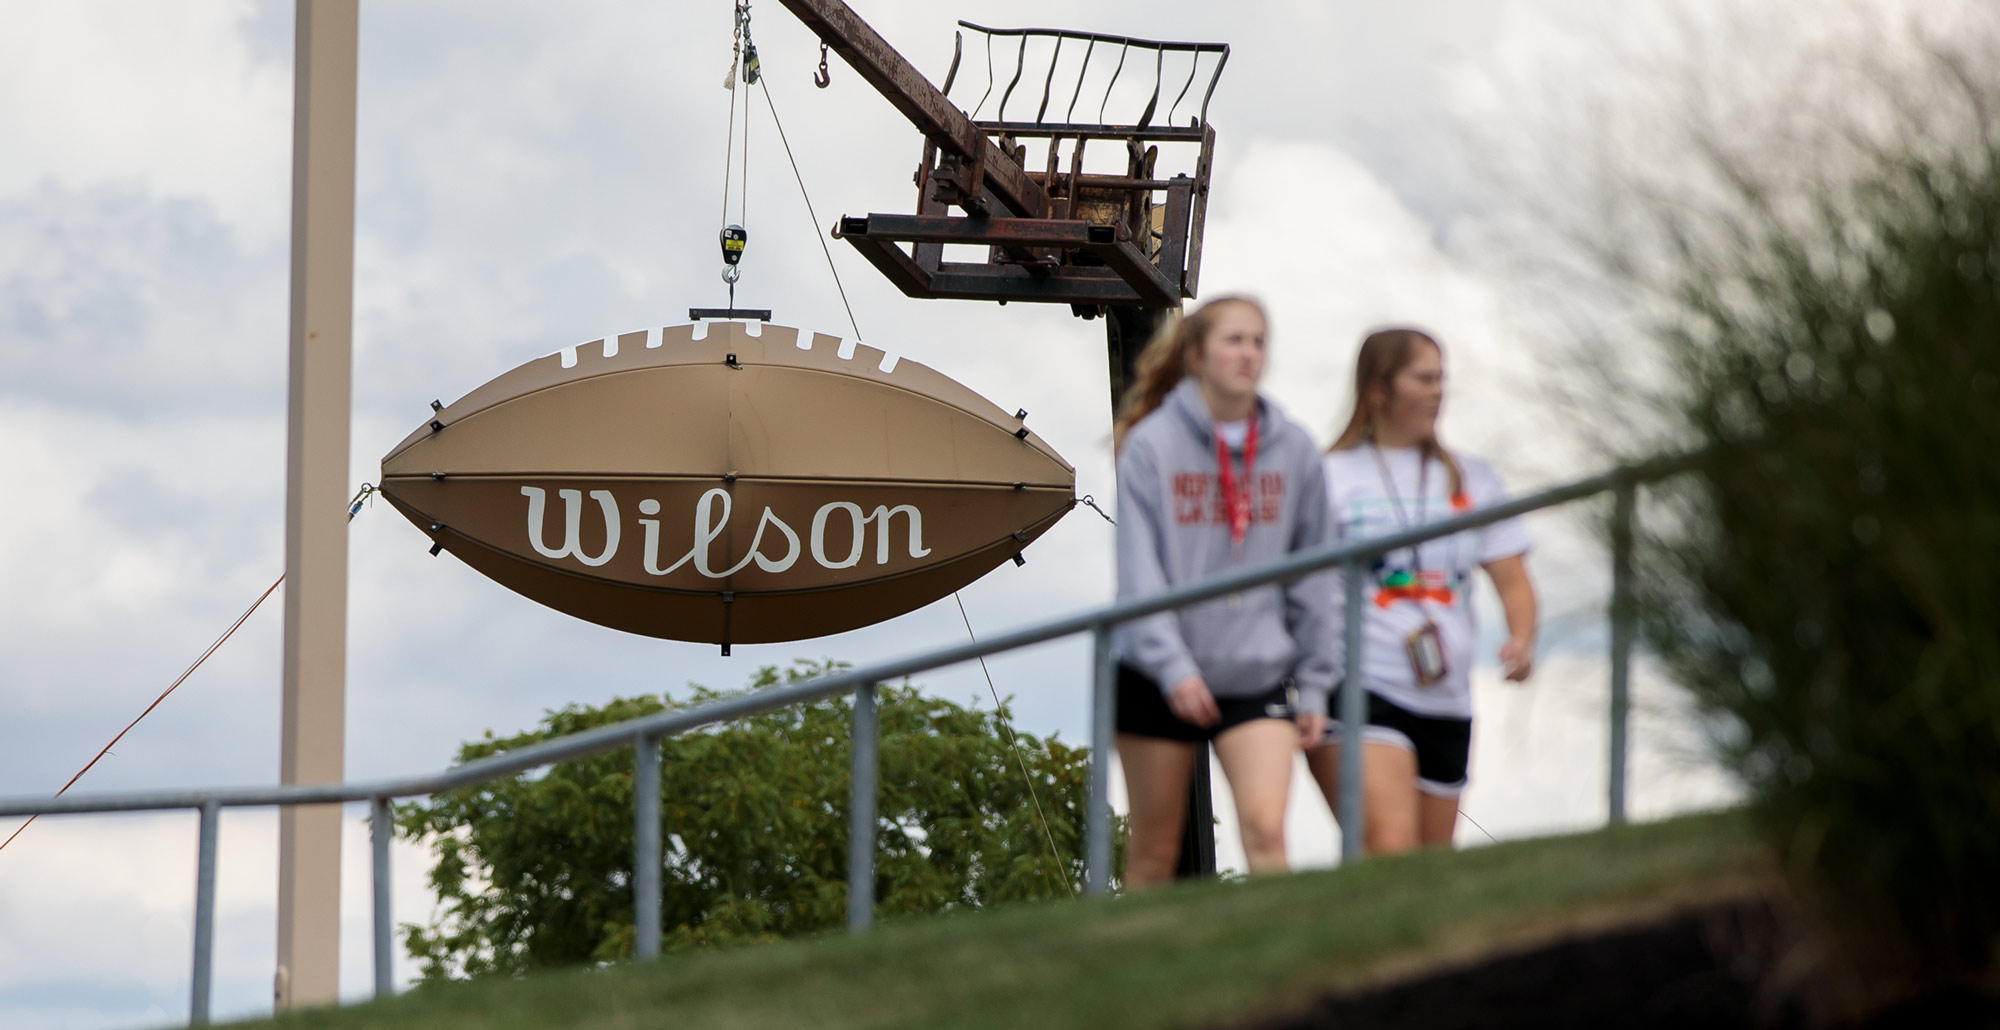 Students walk past the giant Wilson football outside of Dial-Roberson Stadium on the campus of 葫芦影业.